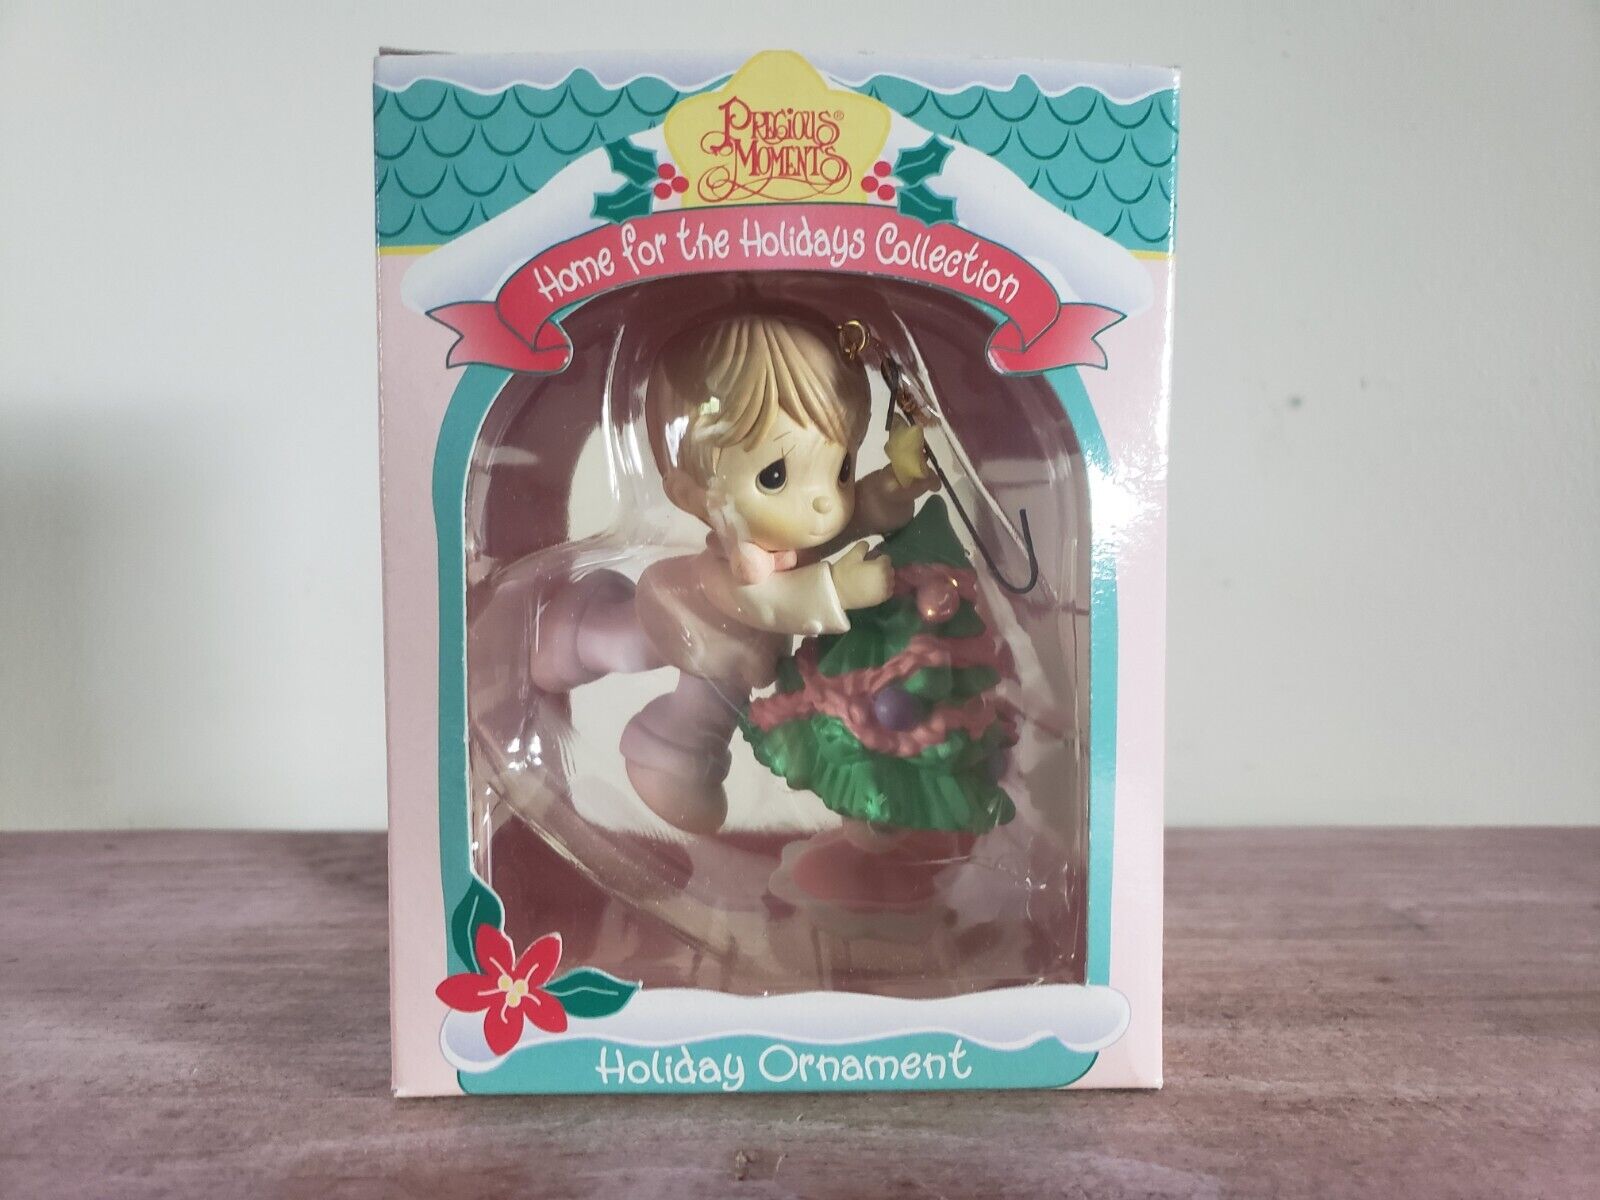 1995 Precious Moments Holiday Ornament Boy With Tree